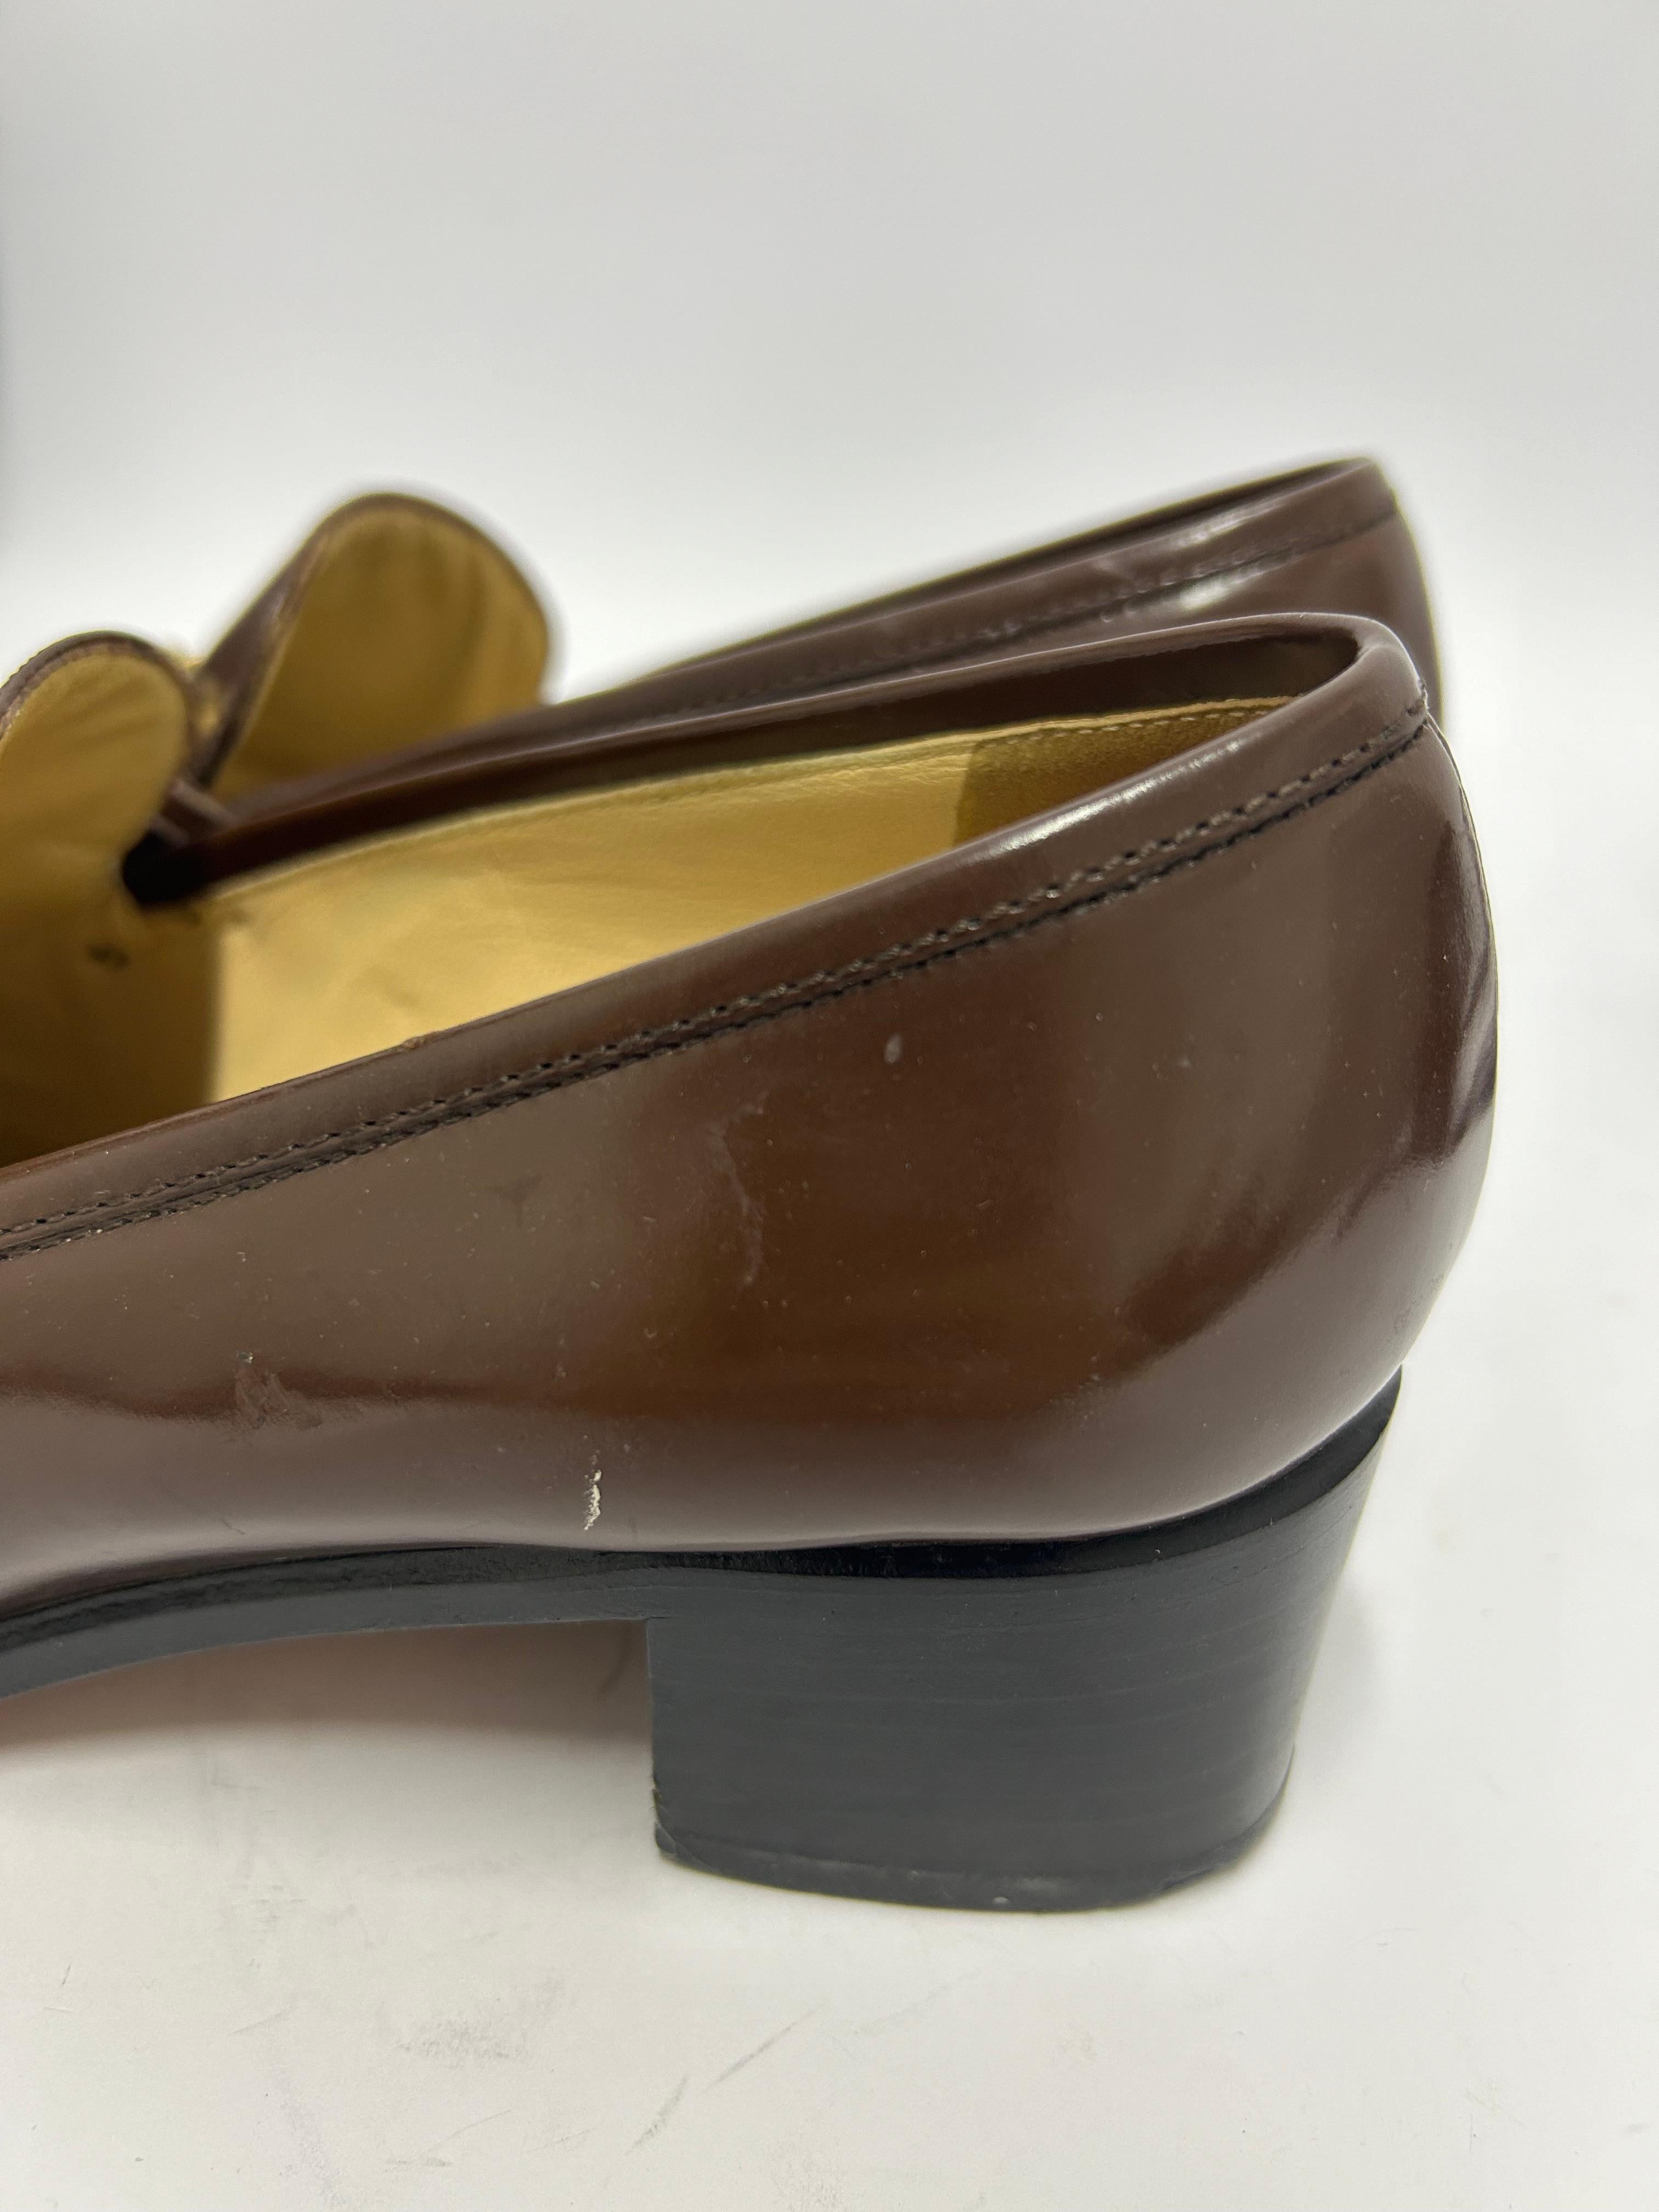 Gucci Horsebit Leather Loafers Size EU 36.5 For Sale 7